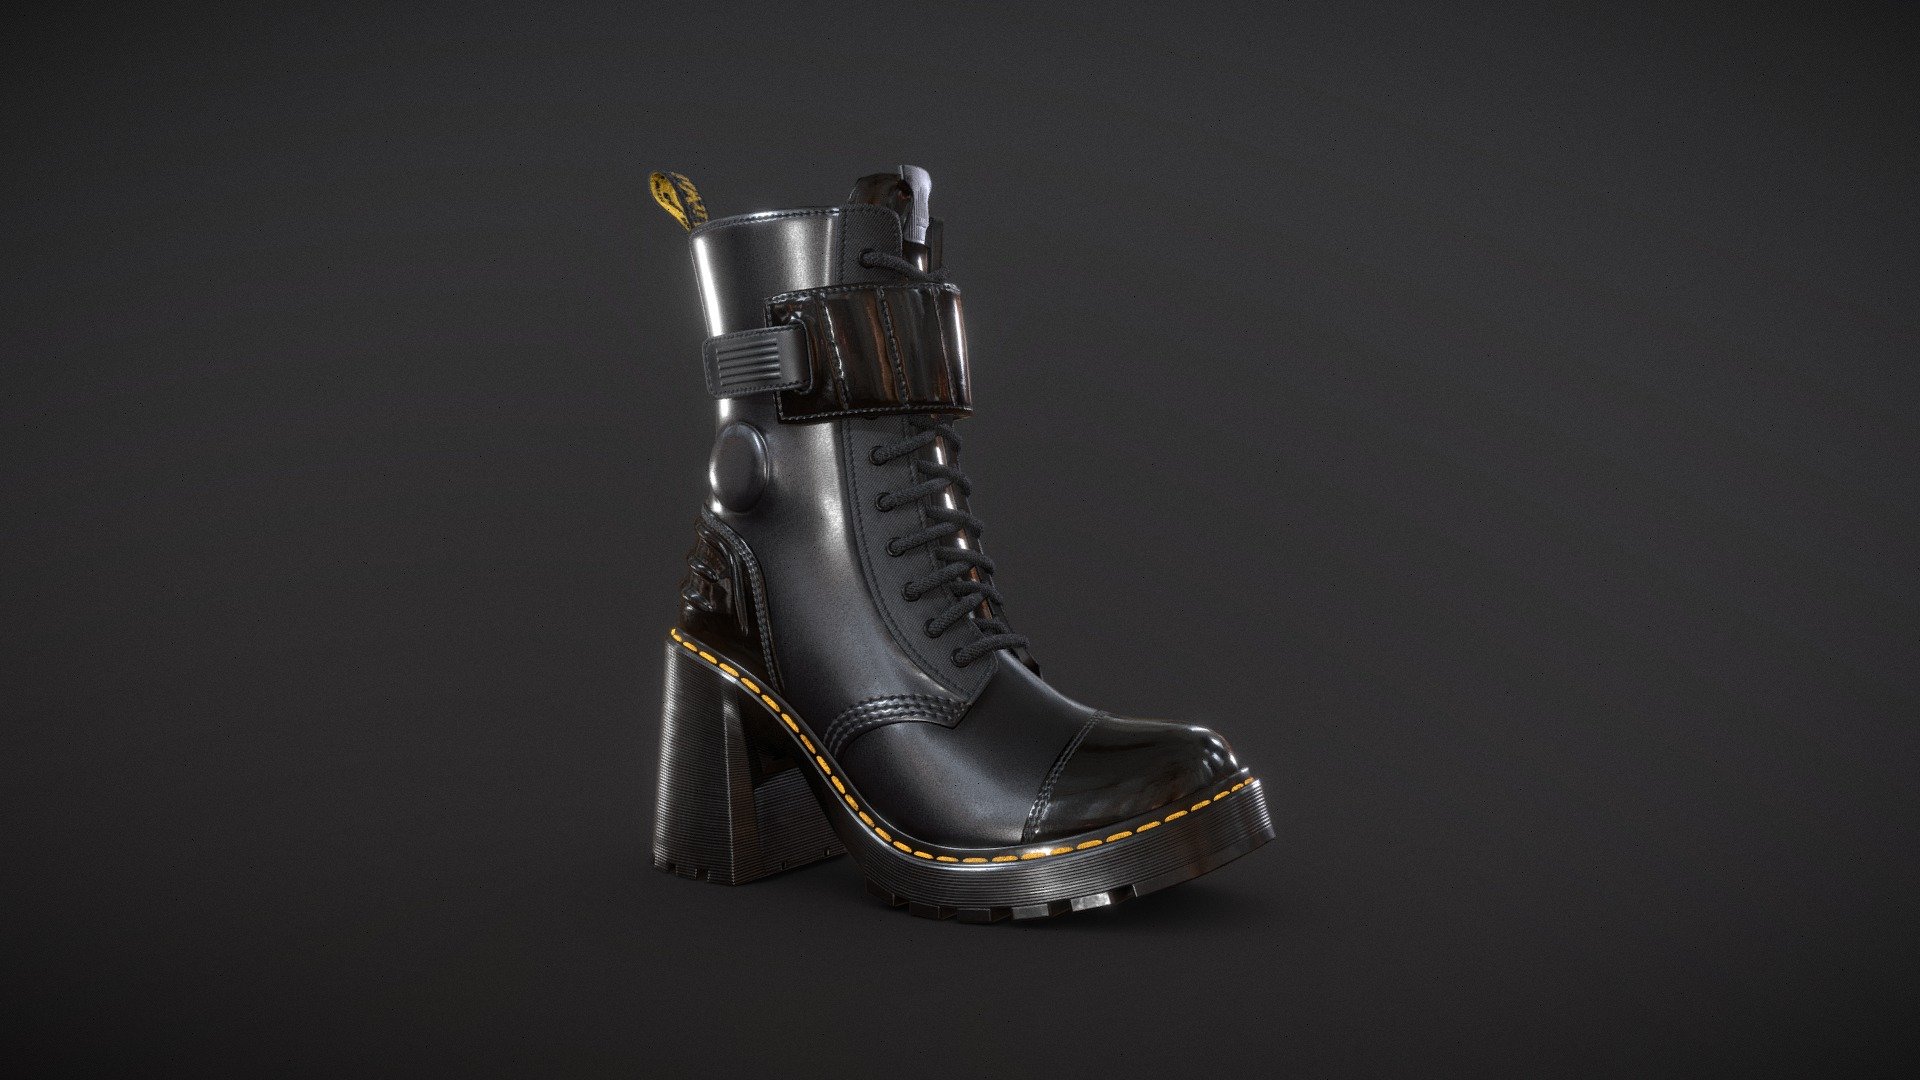 Dr. Martens Gaya 10i

Game and production ready, polycount optimized for quality, ideal for high quality Characters and Close-Ups

Internal parts modeled and textured, ideal for customization or animation

Laces are continuous, no cuts behind the eyelets

Single UV space

PBR and UE4 4k Textures

Low Poly has 10k quads

FBX, OBJ, ZTL - Dr. Martens Gaya 10i - Buy Royalty Free 3D model by Feds452 3d model